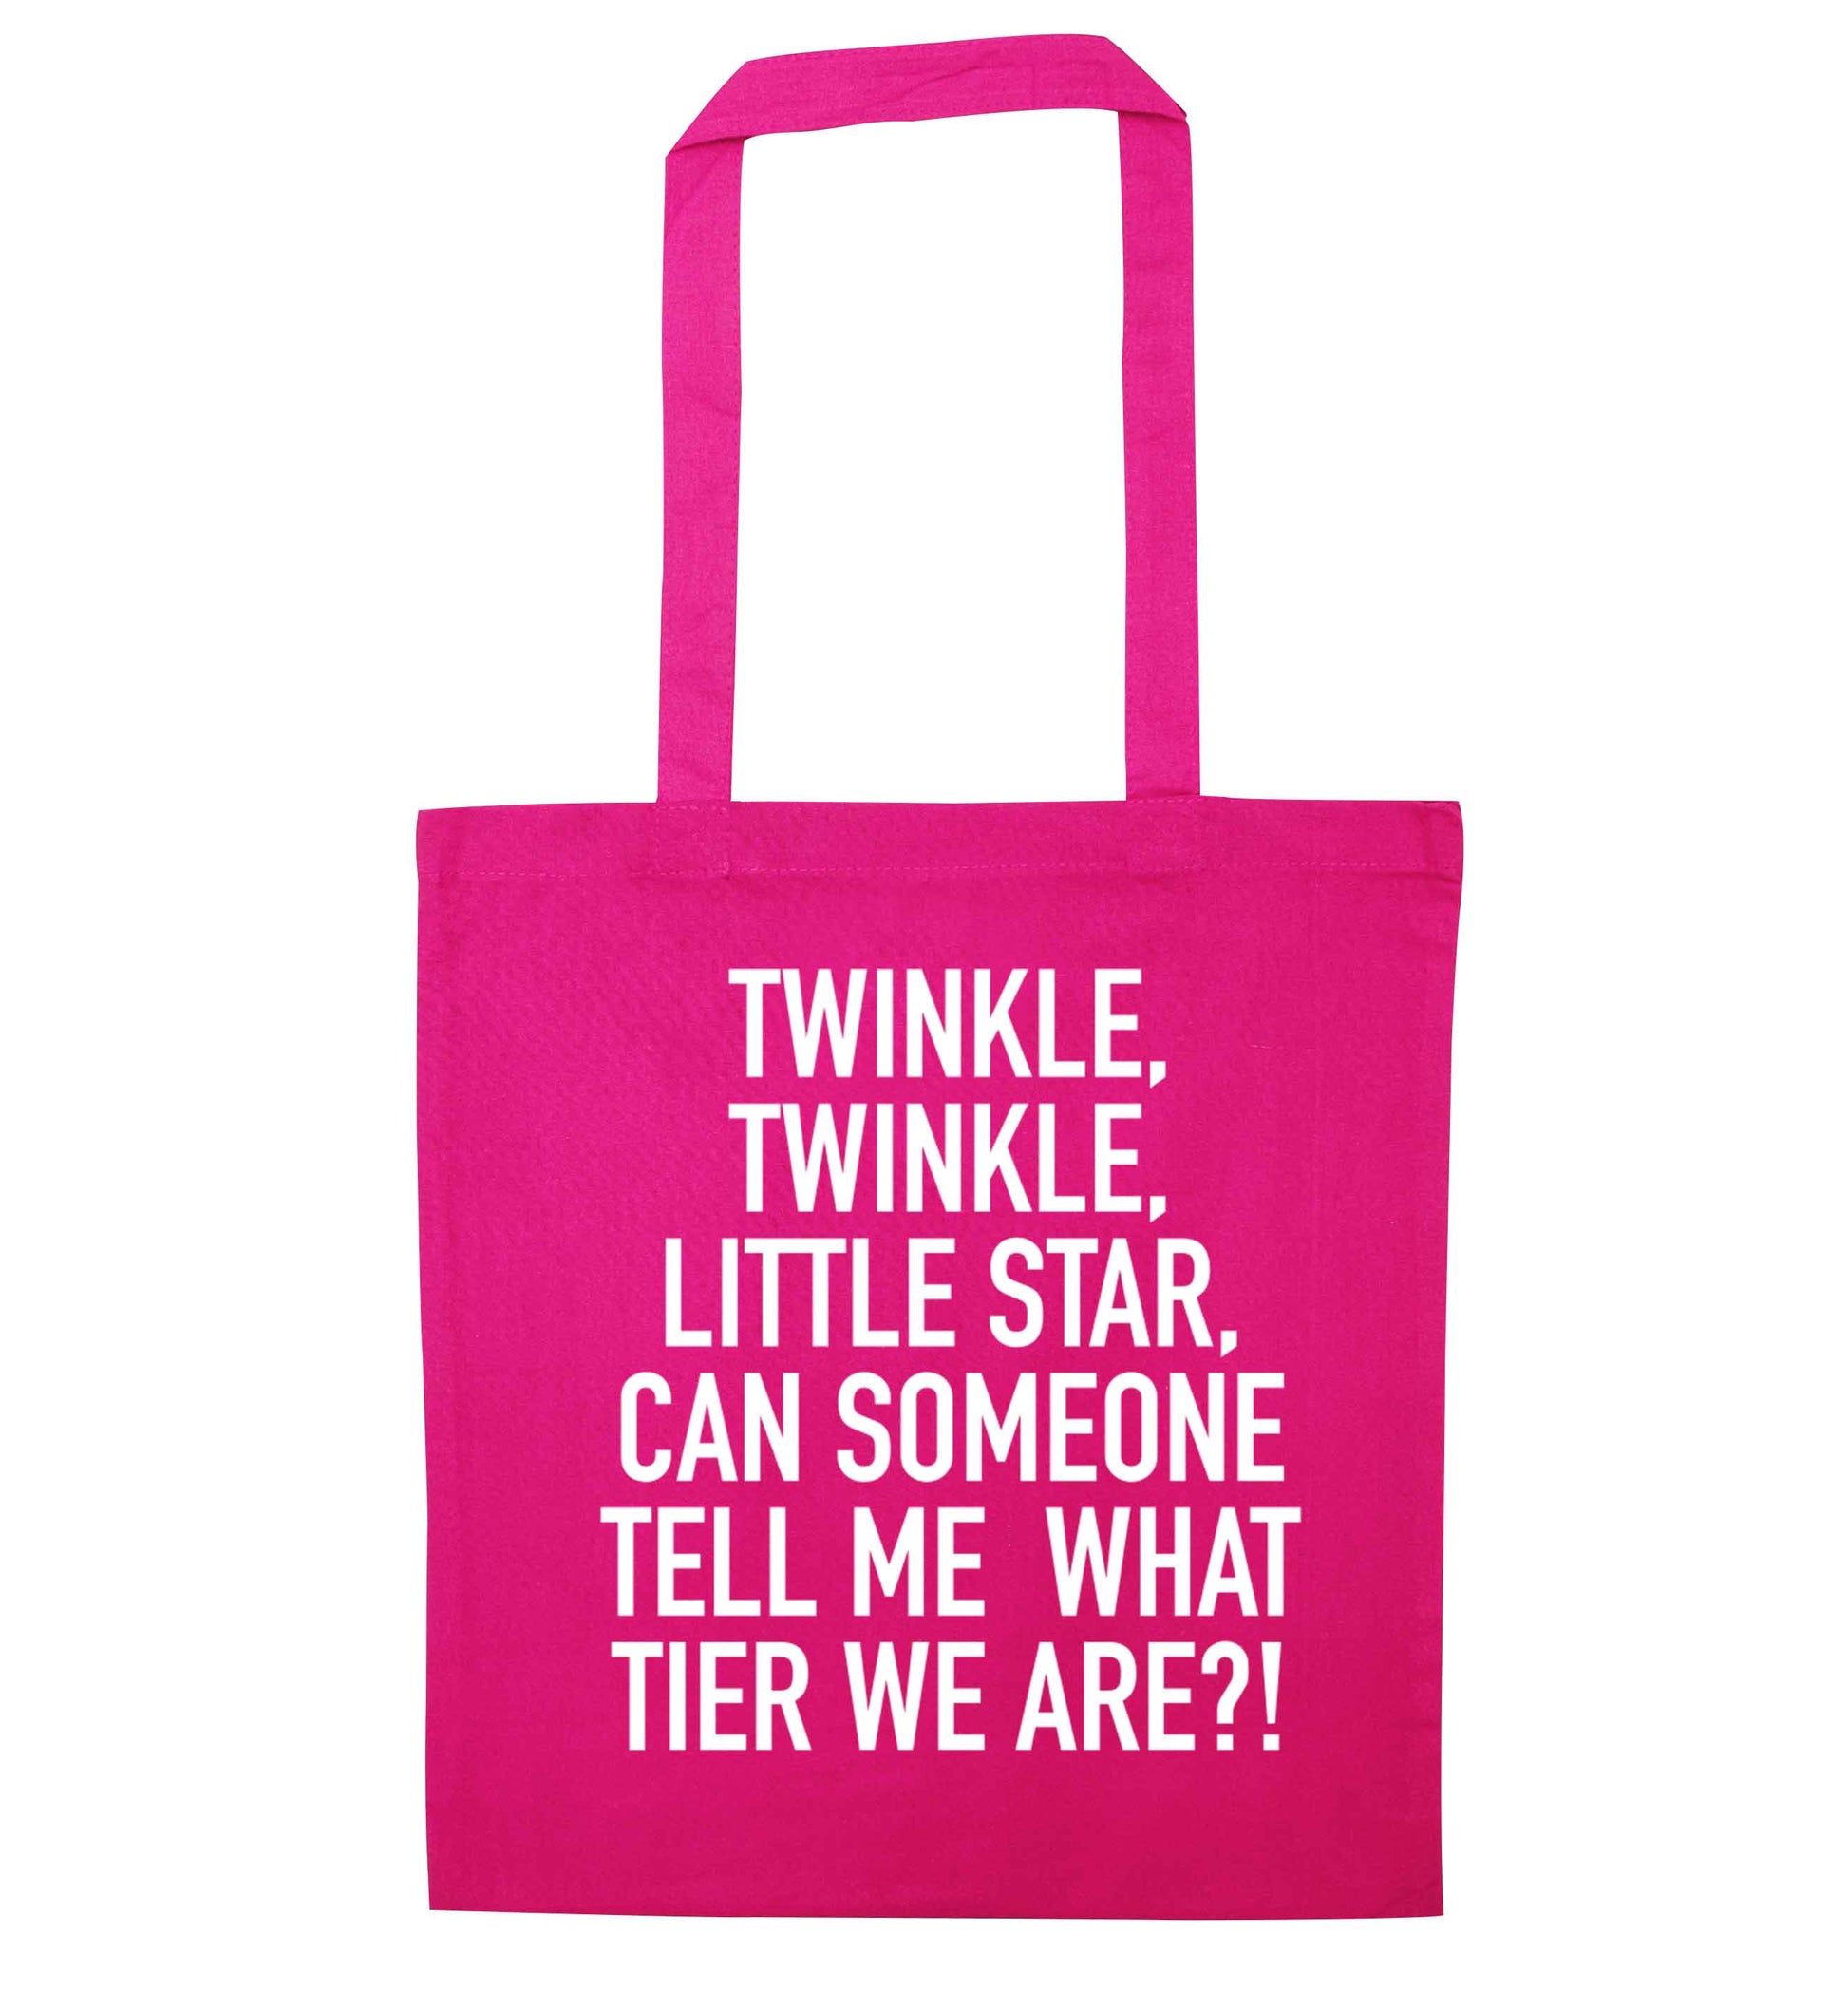 Twinkle twinkle, little star does anyone know what tier we are? pink tote bag